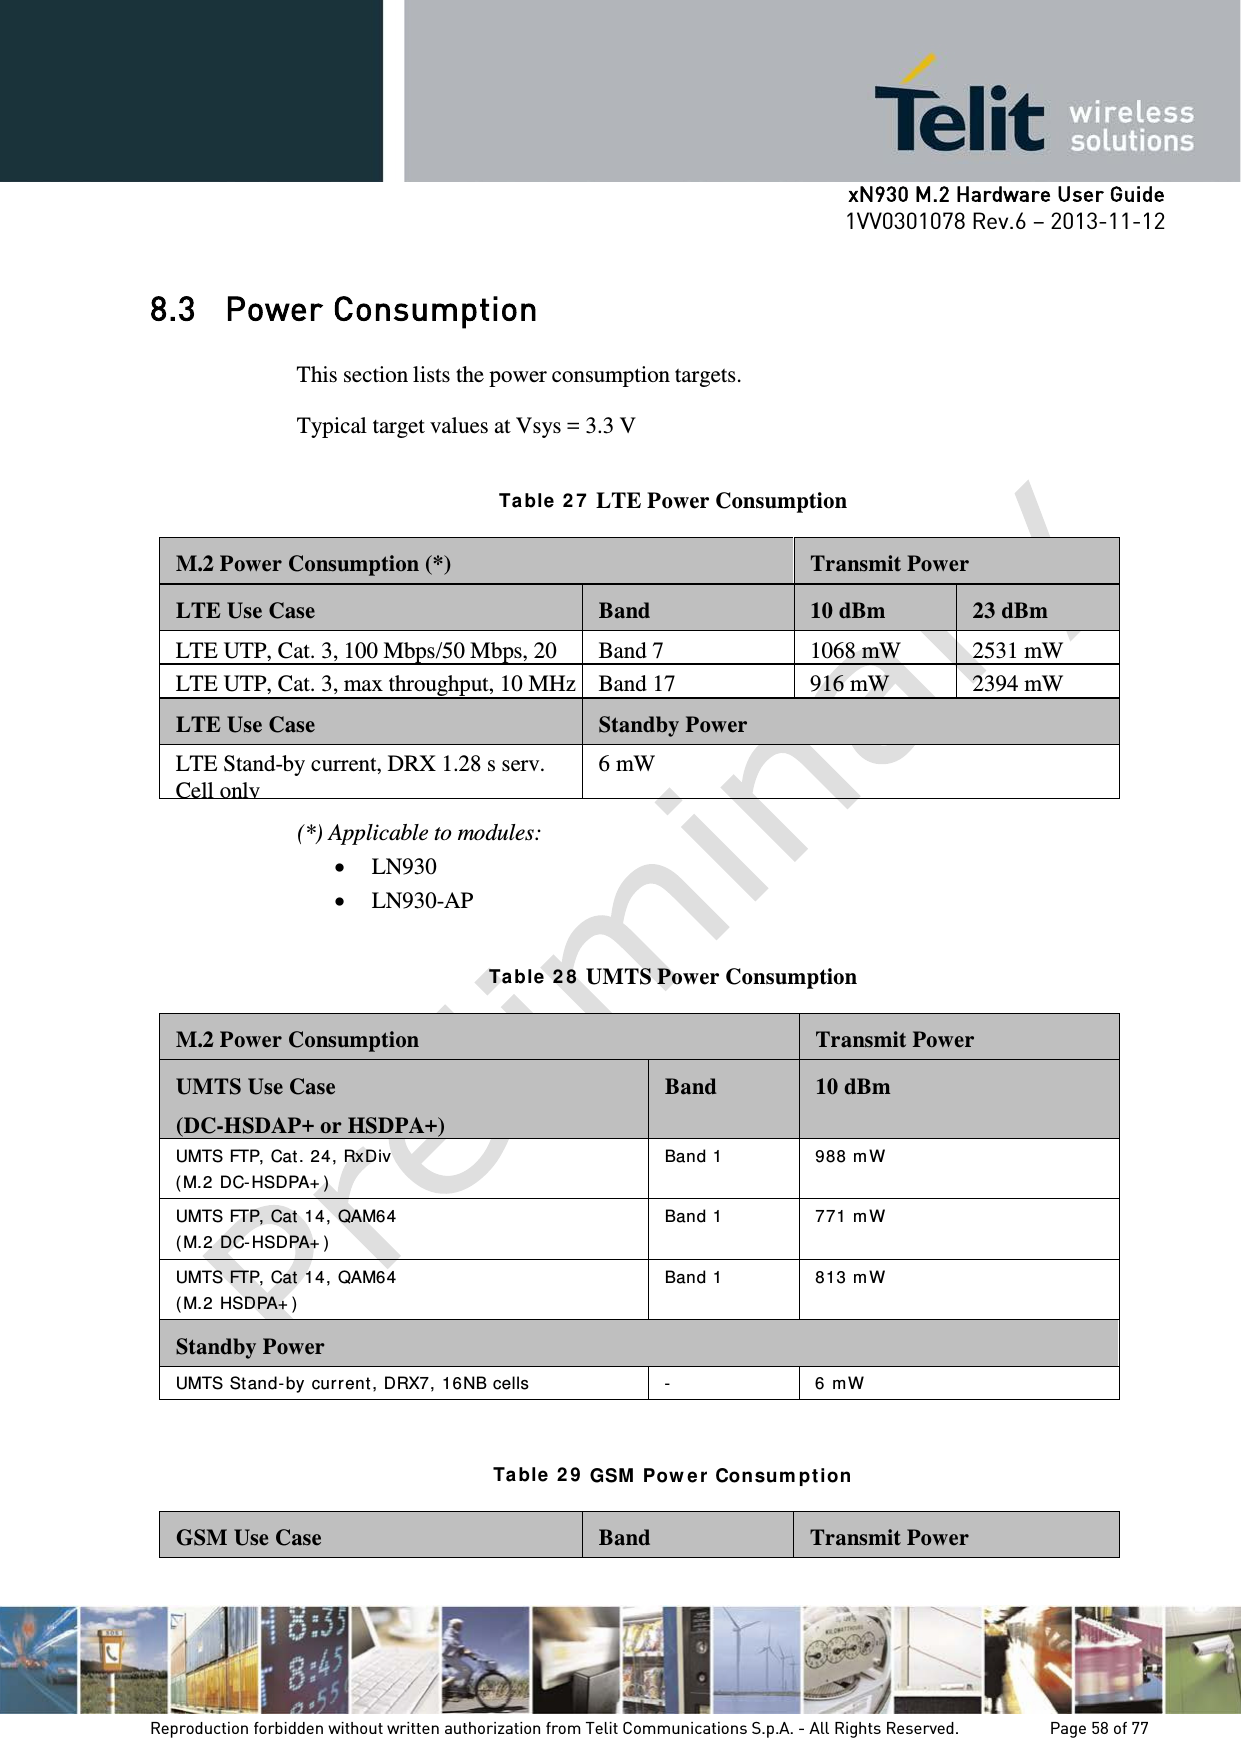      xN930 M.2 Hardware User Guide 1VV0301078 Rev.6 – 2013-11-12    8.3 Power Consumption  This section lists the power consumption targets. Typical target values at Vsys = 3.3 V  Ta ble  2 7  LTE Power Consumption  M.2 Power Consumption (*)  Transmit Power  LTE Use Case  Band  10 dBm  23 dBm LTE UTP, Cat. 3, 100 Mbps/50 Mbps, 20  Band 7 1068 mW 2531 mW LTE UTP, Cat. 3, max throughput, 10 MHz Band 17 916 mW 2394 mW  LTE Use Case  Standby Power LTE Stand-by current, DRX 1.28 s serv. Cell only 6 mW  (*) Applicable to modules: • LN930 • LN930-AP   Ta ble  2 8  UMTS Power Consumption  M.2 Power Consumption  Transmit Power  UMTS Use Case  (DC-HSDAP+ or HSDPA+)  Band  10 dBm UMTS FTP, Cat. 24, RxDiv ( M. 2 DC-HSDPA+ ) Band 1  988 m W UMTS FTP, Cat  14, QAM6 4 ( M. 2 DC-HSDPA+ ) Band 1  771 m W UMTS FTP, Cat  14, QAM6 4 ( M. 2 HSDPA+ ) Band 1  813 m W  Standby Power UMTS St and- by cu r rent , DRX7, 16NB cells  -  6 m W    Ta ble  2 9  GSM  Pow er  Consum pt i on   GSM Use Case  Band  Transmit Power   Reproduction forbidden without written authorization from Telit Communications S.p.A. - All Rights Reserved.    Page 58 of 77 